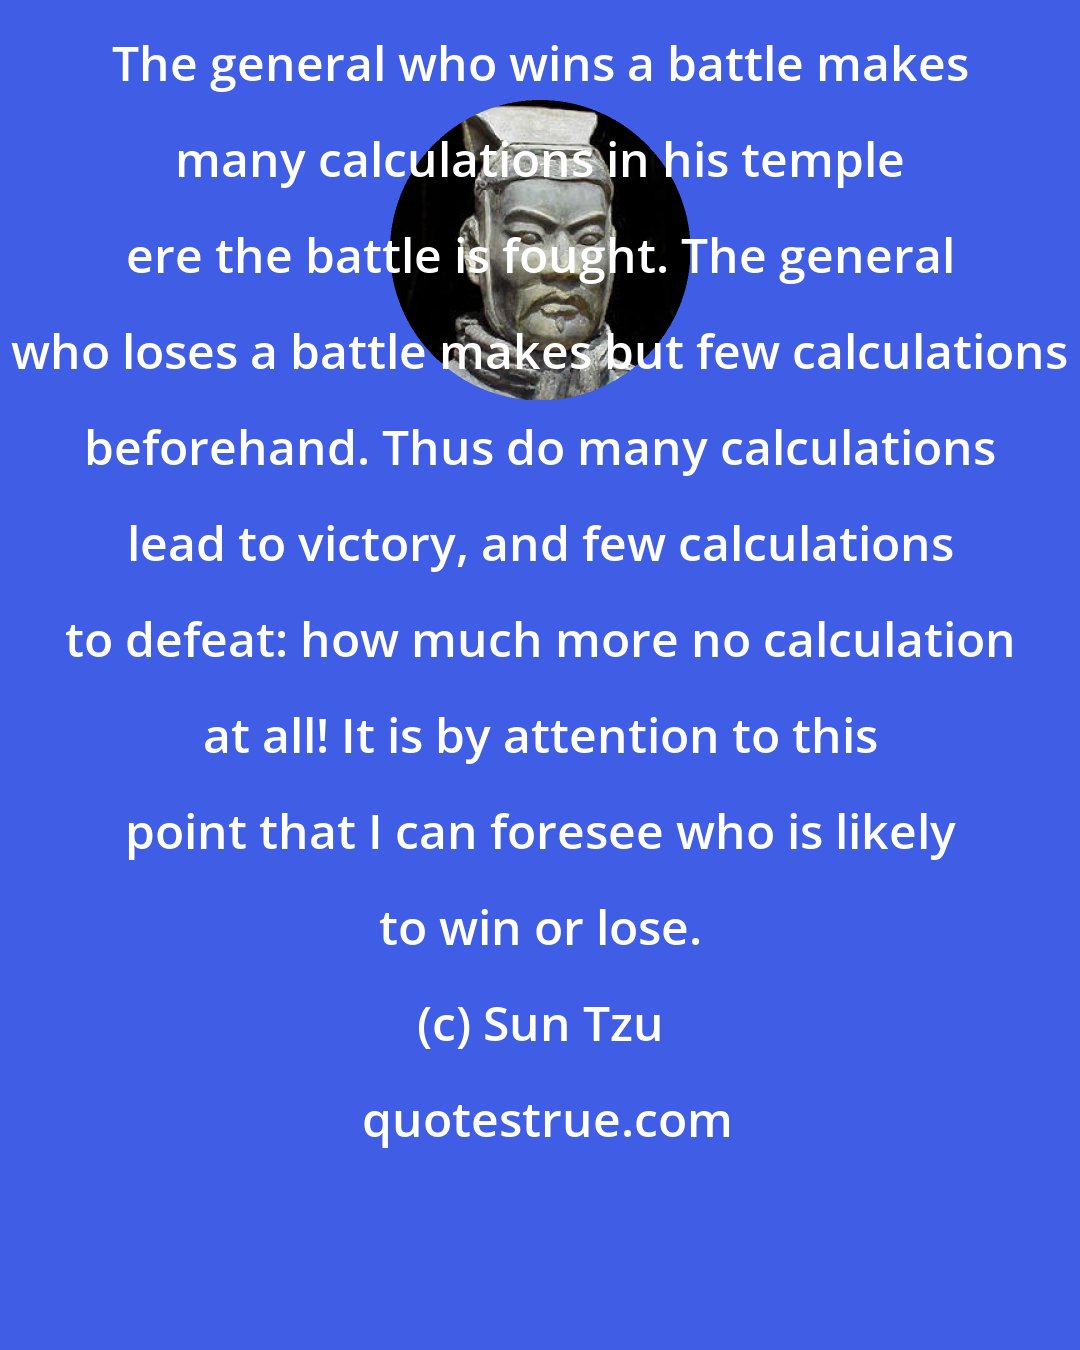 Sun Tzu: The general who wins a battle makes many calculations in his temple ere the battle is fought. The general who loses a battle makes but few calculations beforehand. Thus do many calculations lead to victory, and few calculations to defeat: how much more no calculation at all! It is by attention to this point that I can foresee who is likely to win or lose.